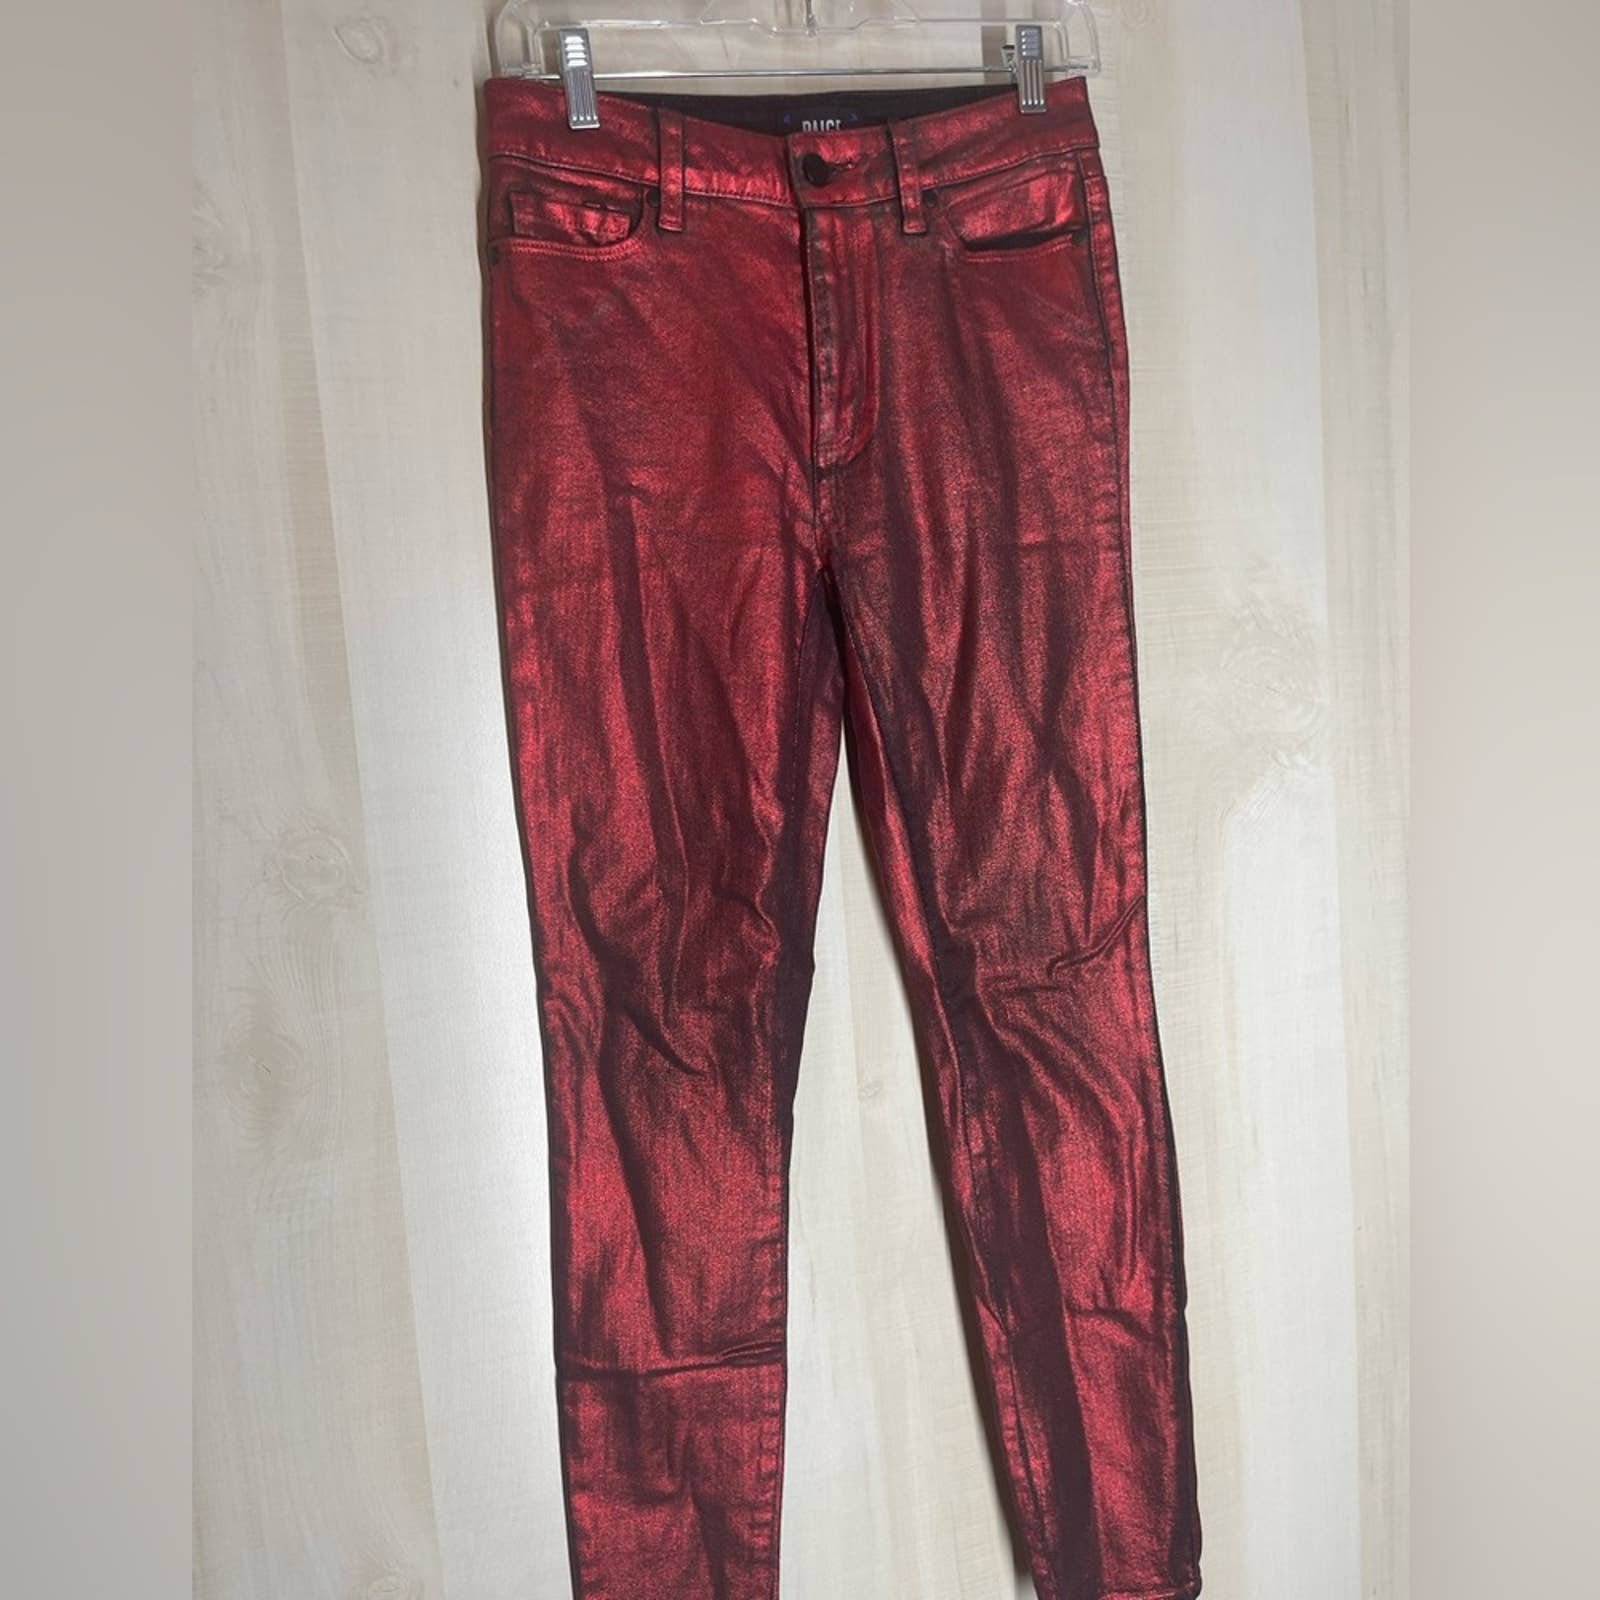 Simple Paige Hoxton Ultra Skinny red metallic jeans, si